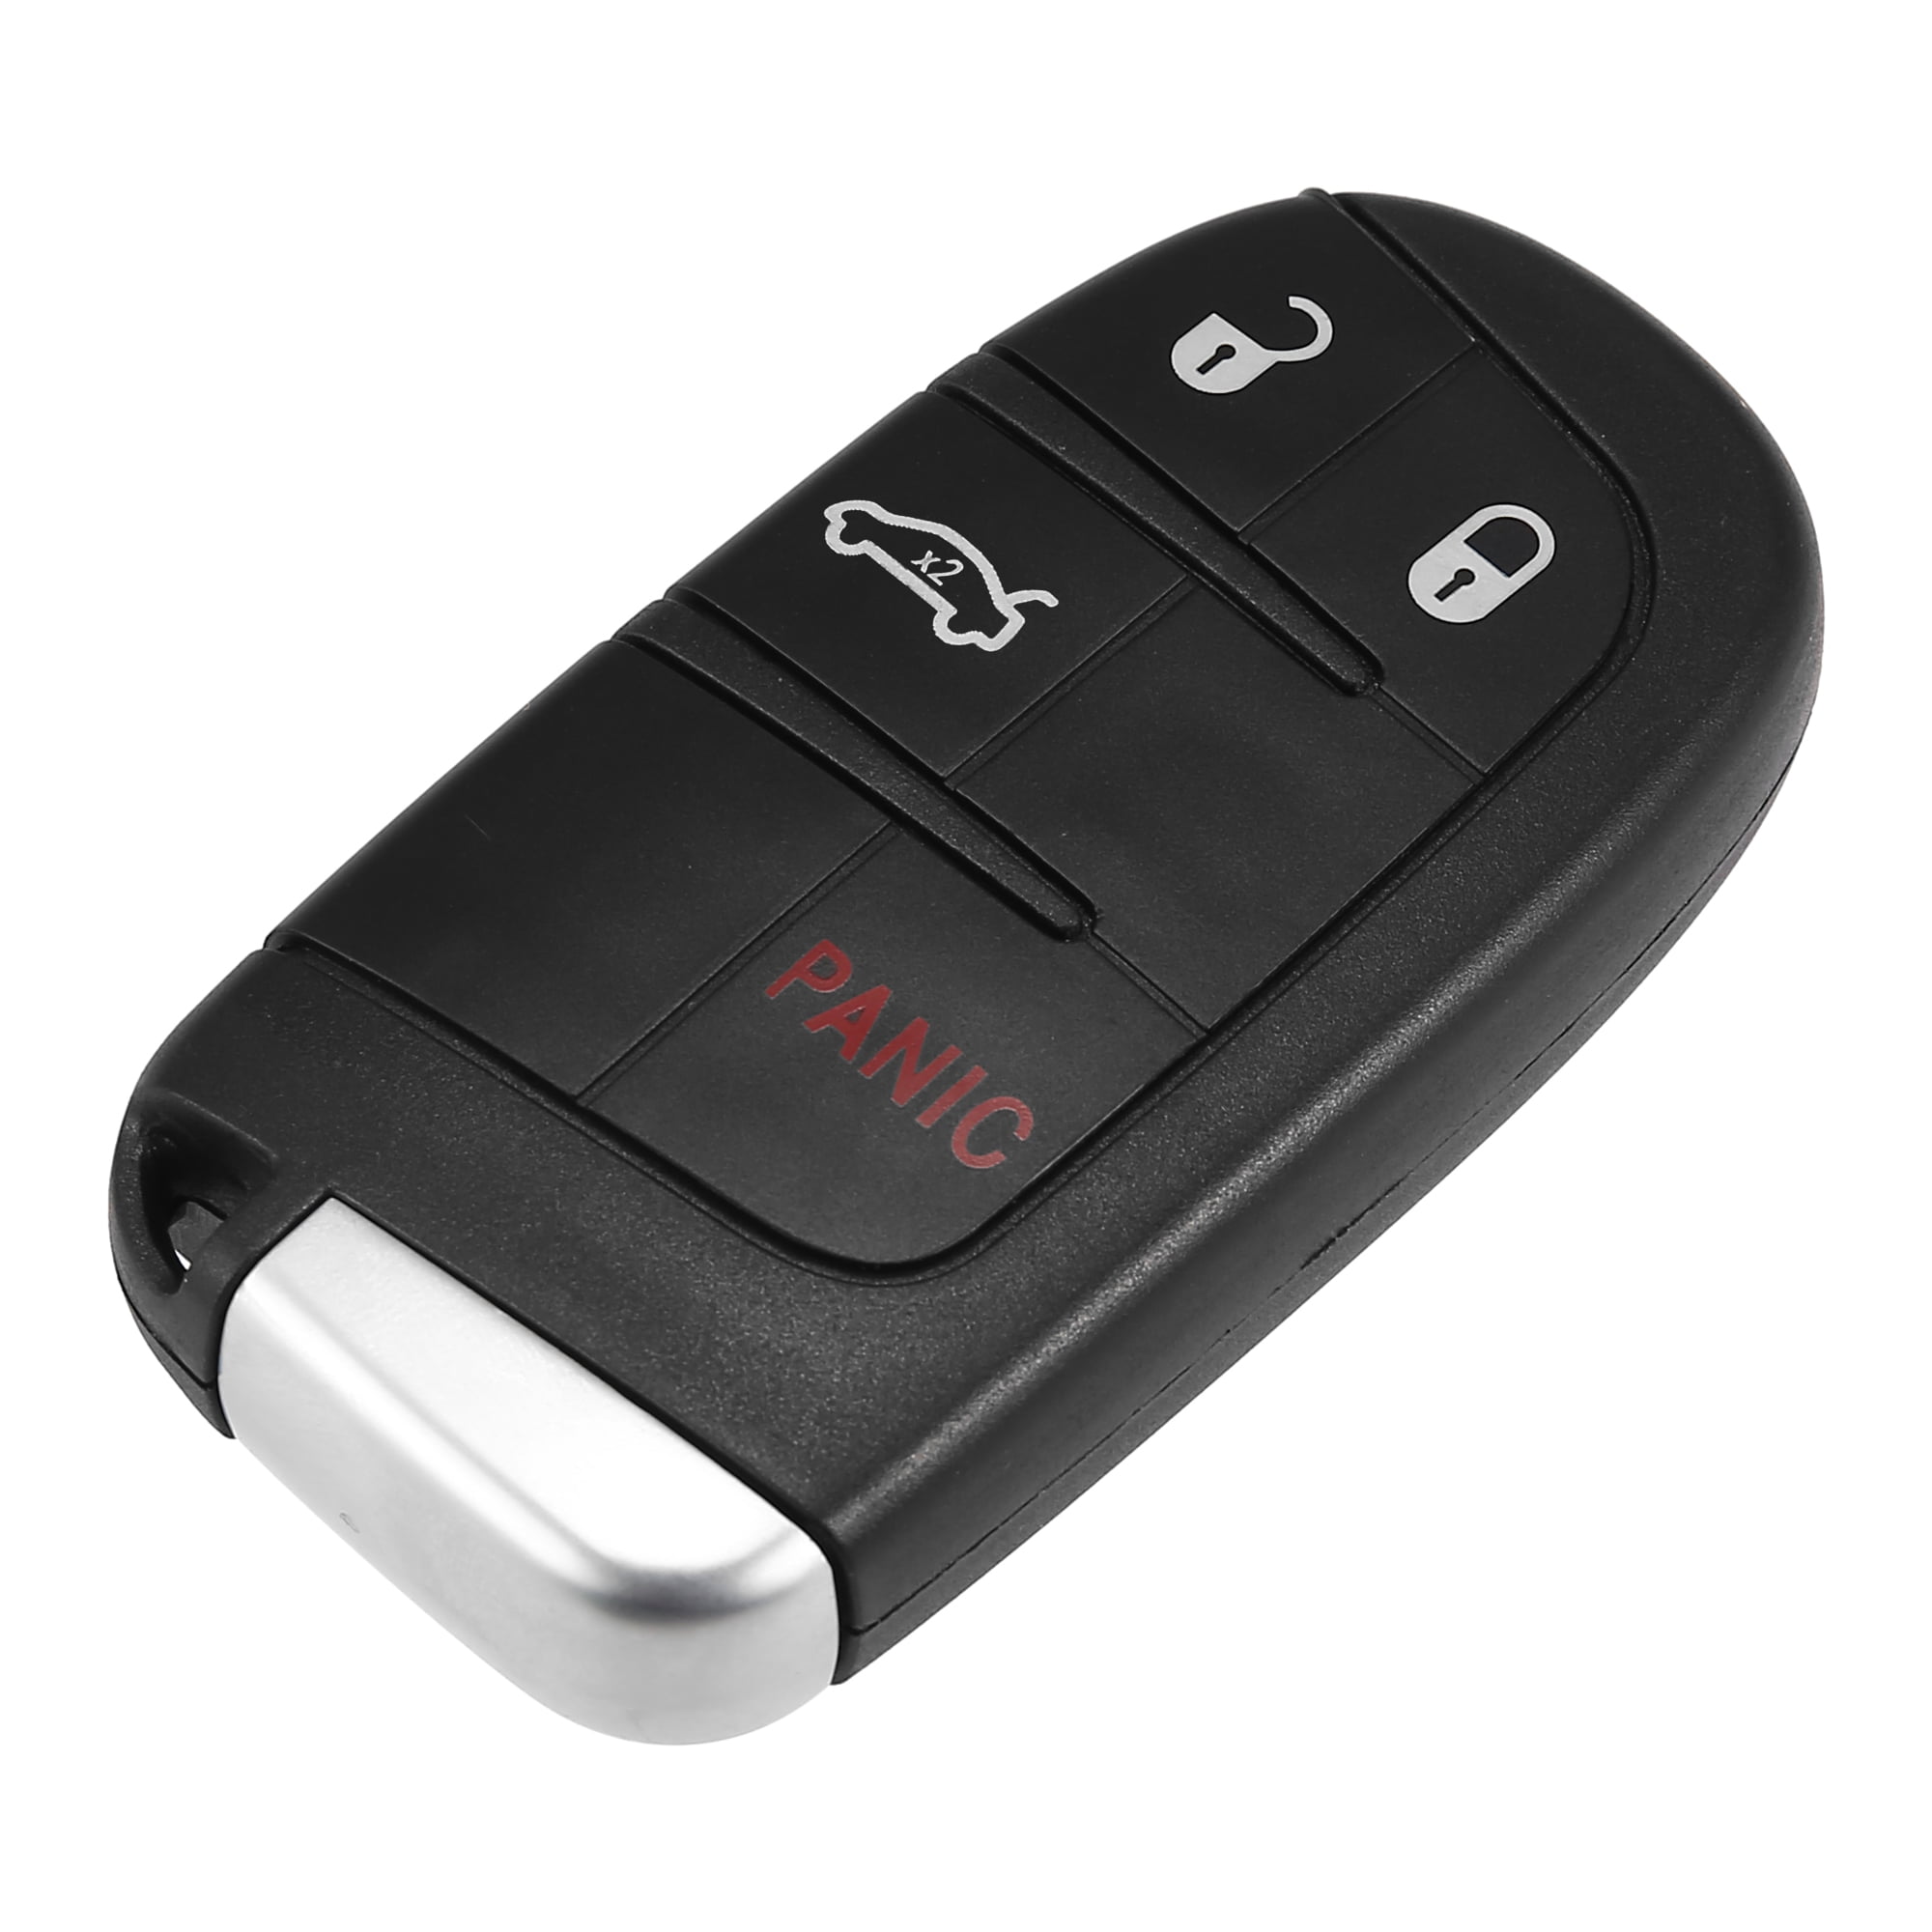 Keyless Entry Remotes, Car Remote Replacements, Key Fobs, Keys